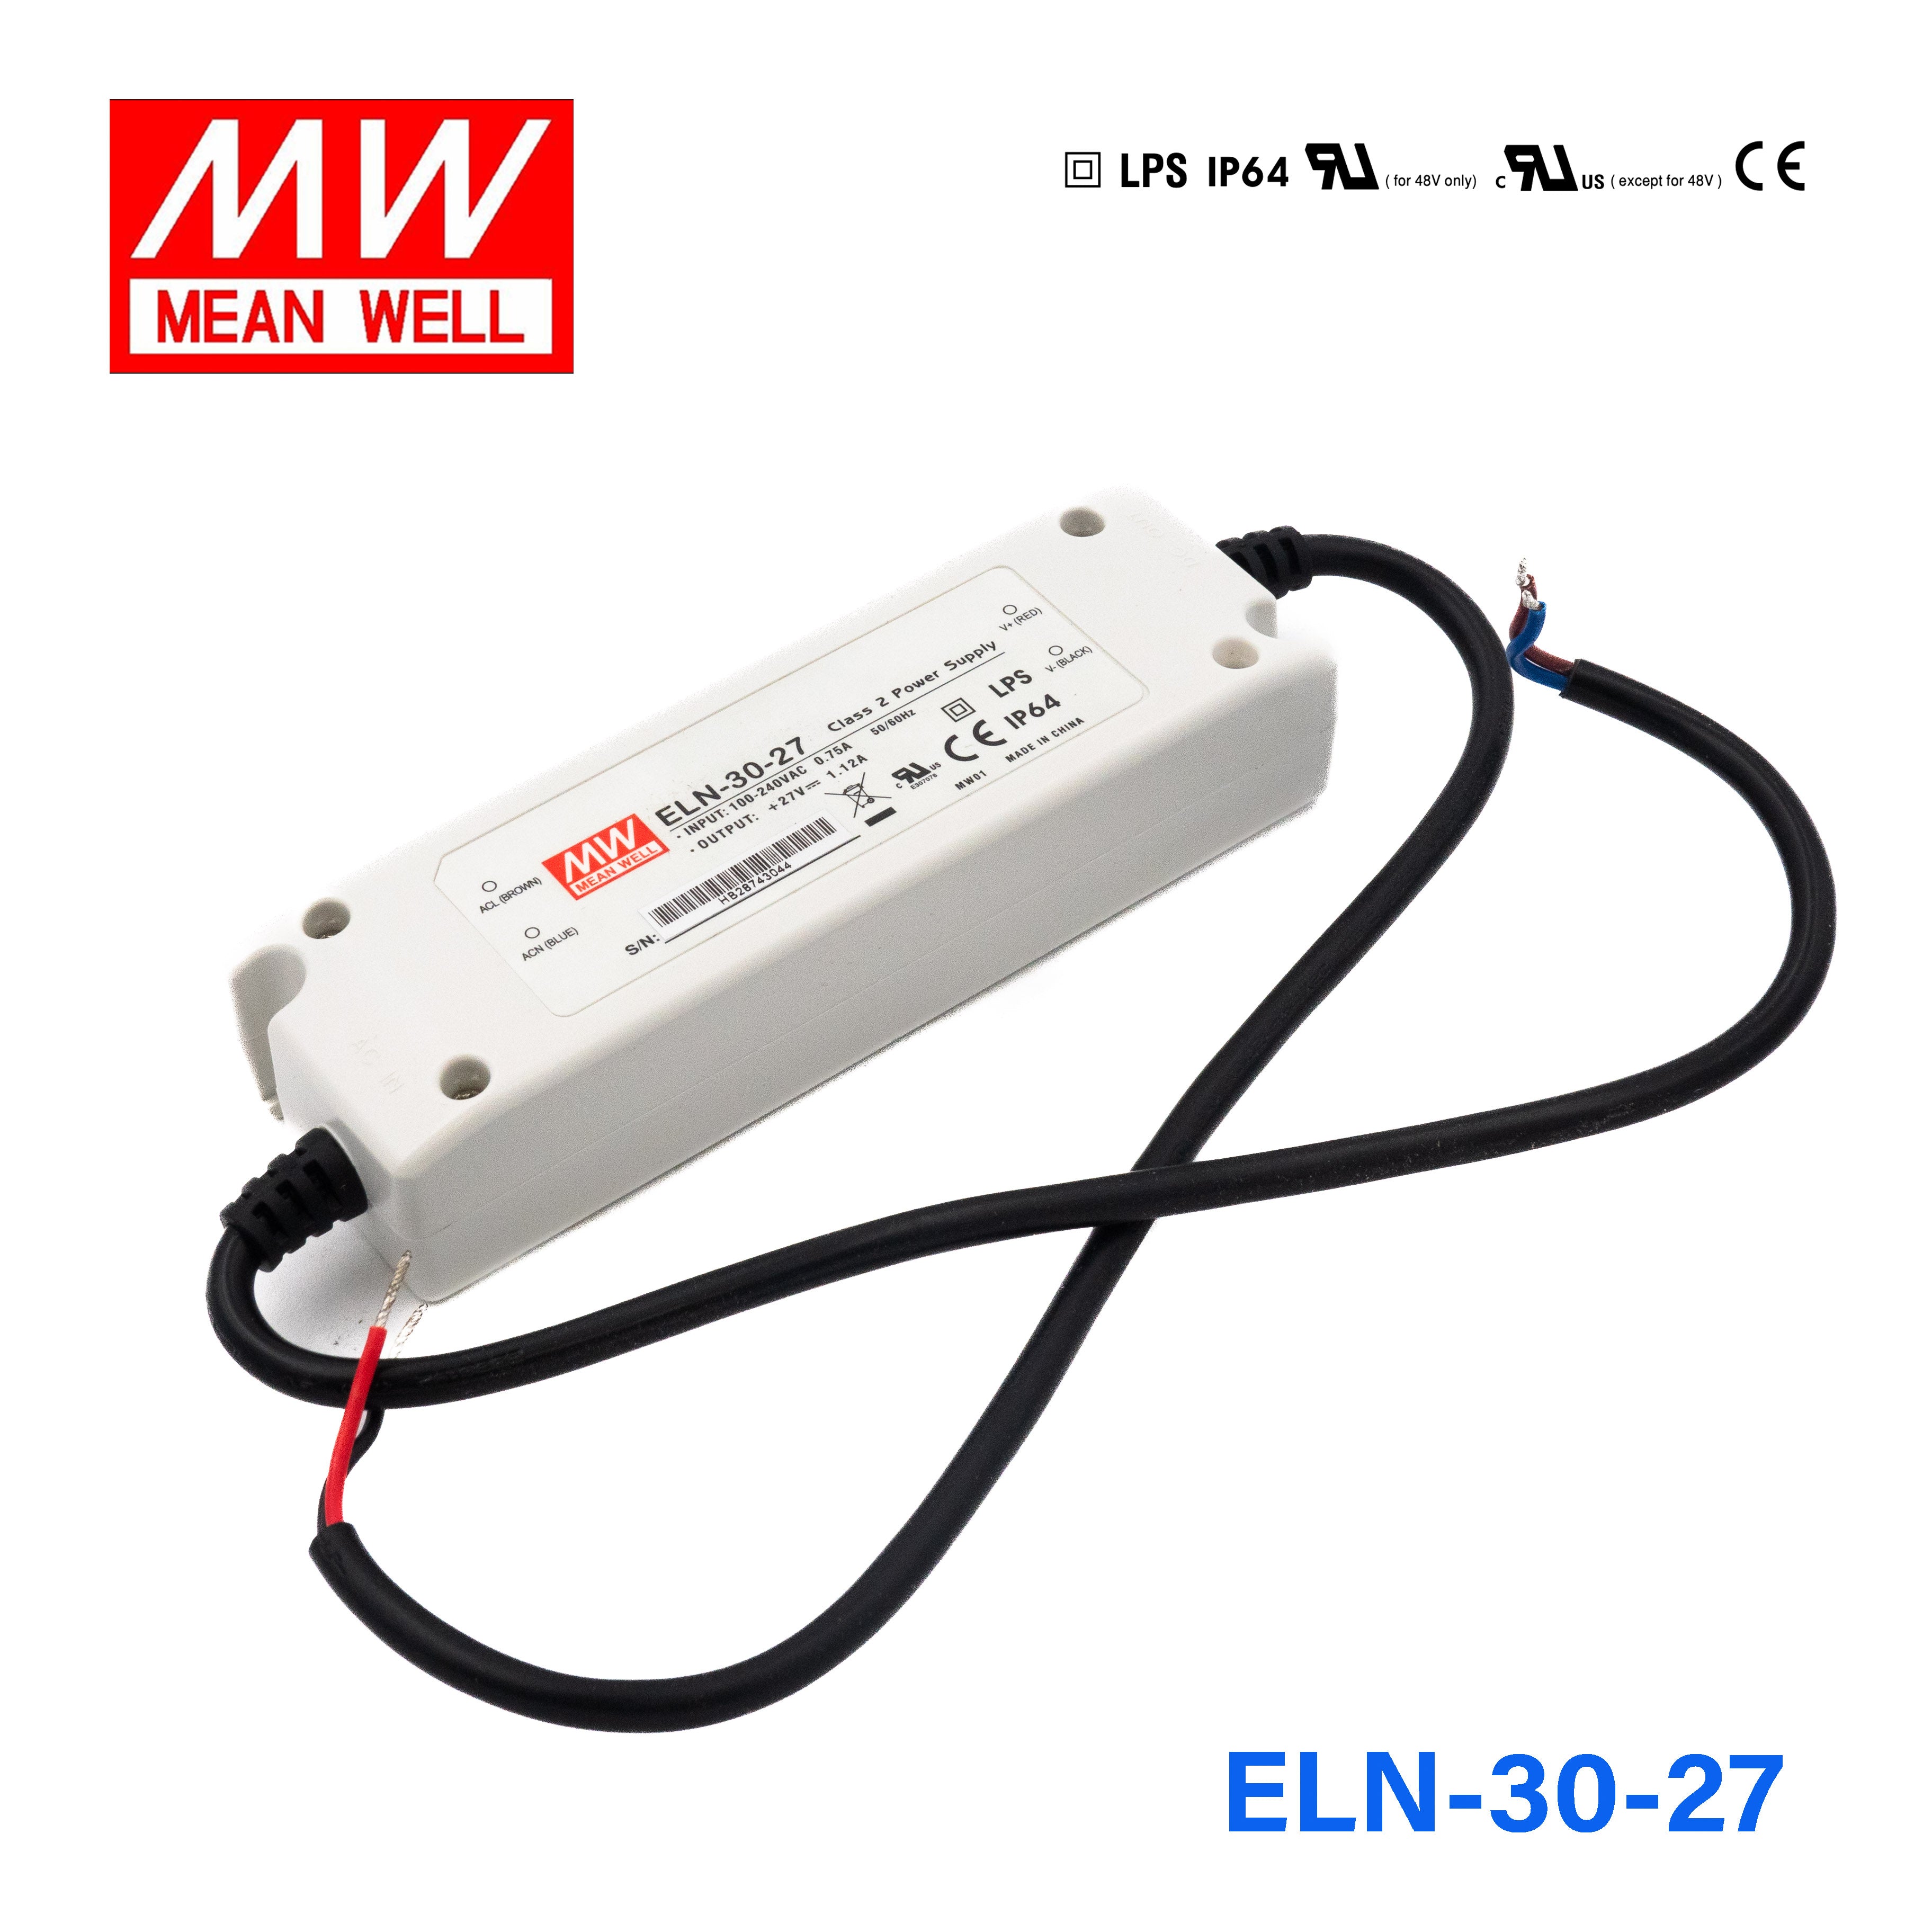 Mean Well ELN-30-27 LED Power Supplies 30.24W 27V 1.12A